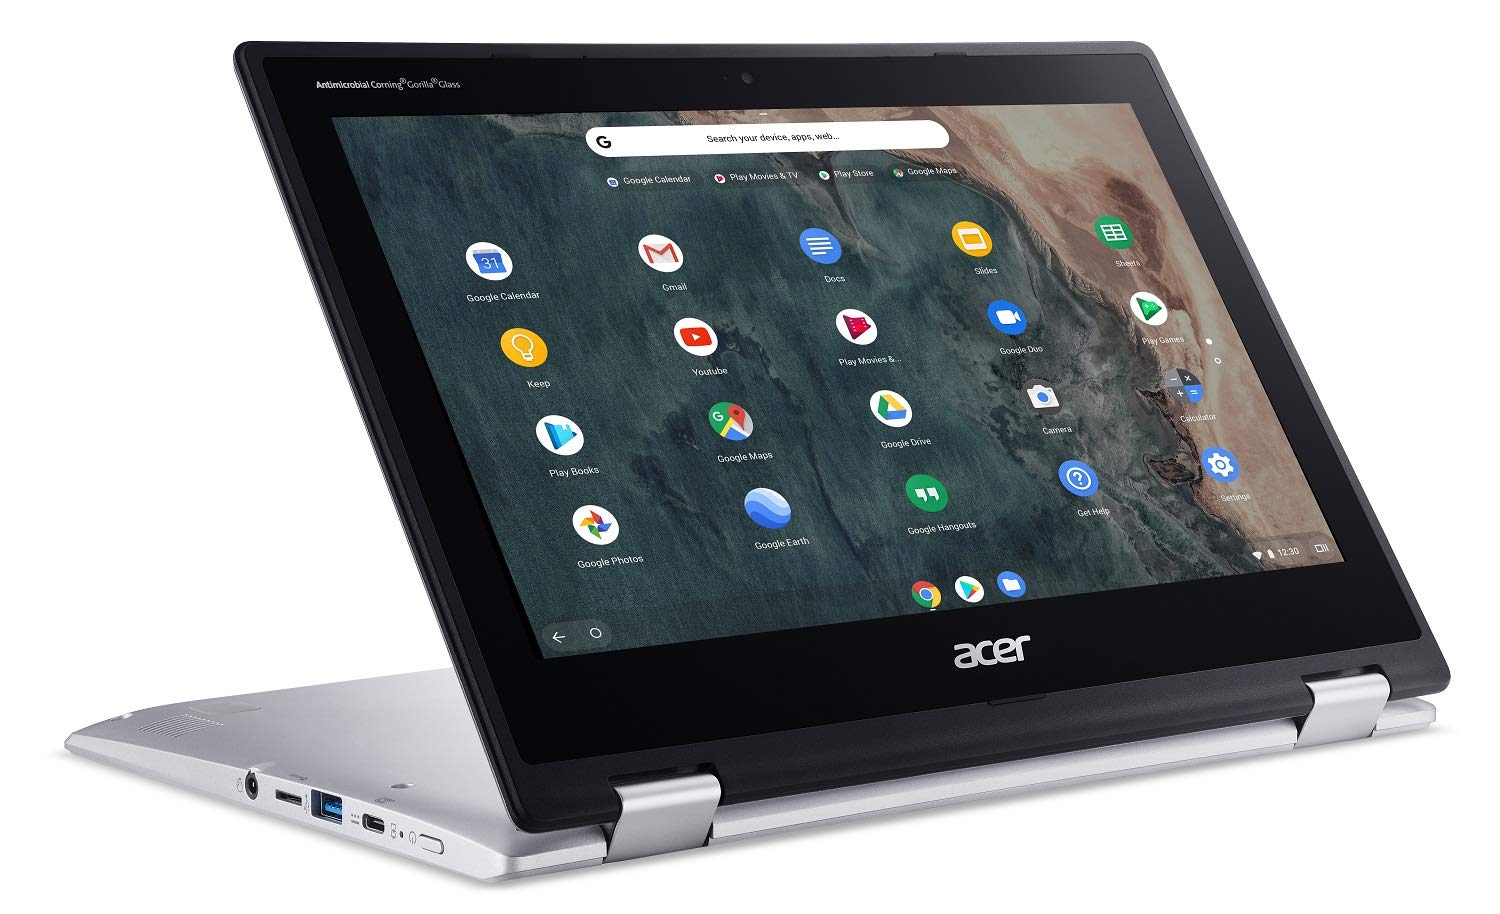 The Acer Chromebook Spin 311 in stand mode on a white background